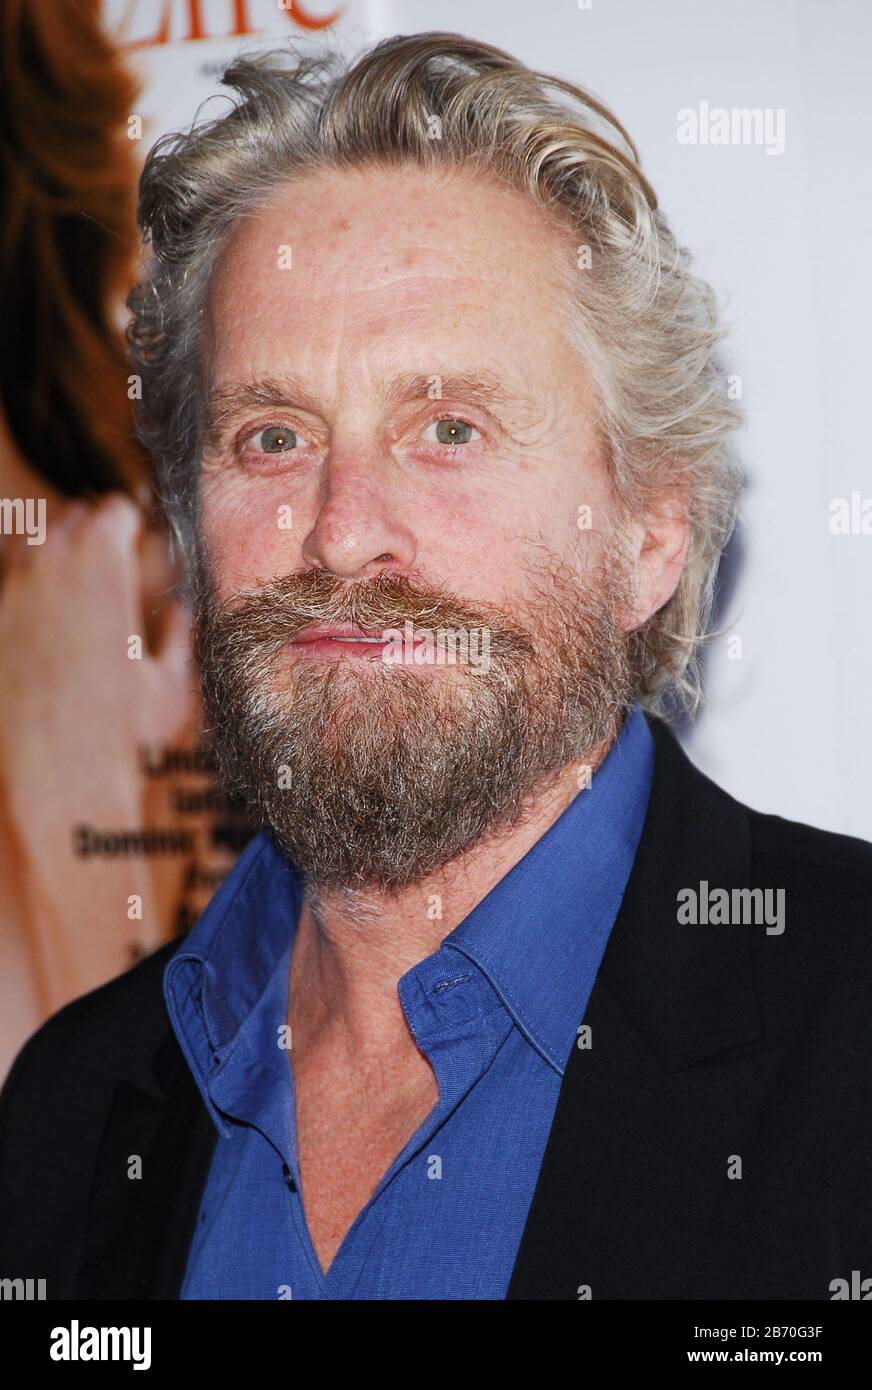 Michael Douglas at the Hollywood Life Magazine's 8th Annual Young Hollywood Awards held at the Henry Fonda Music Box Theater in Hollywood, CA. The event took place on Sunday, April 30, 2006.  Photo by: SBM / PictureLux - All Rights Reserved - File Reference # 33984-2379SBMPLX Stock Photo